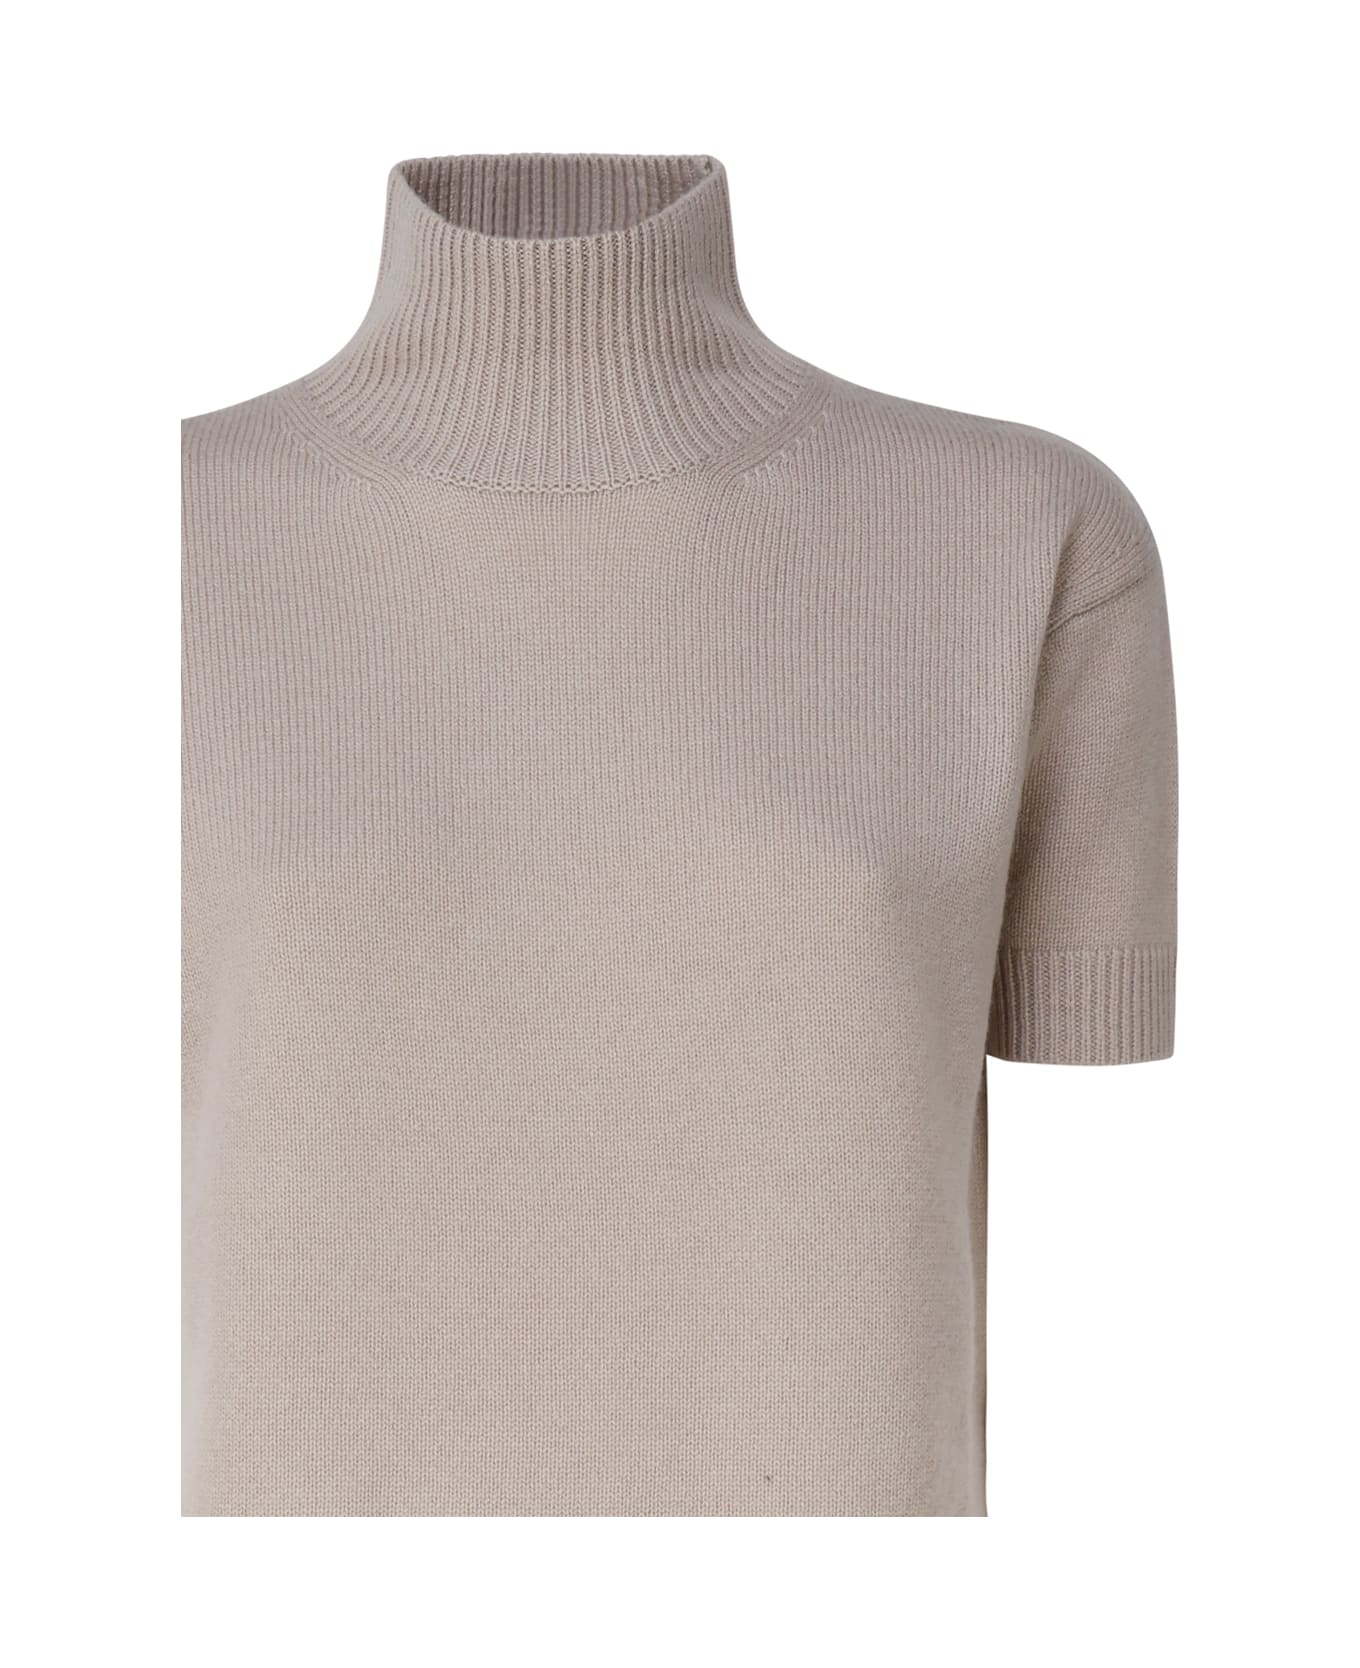 'S Max Mara Wool And Cashmere Turtleneck - Natural